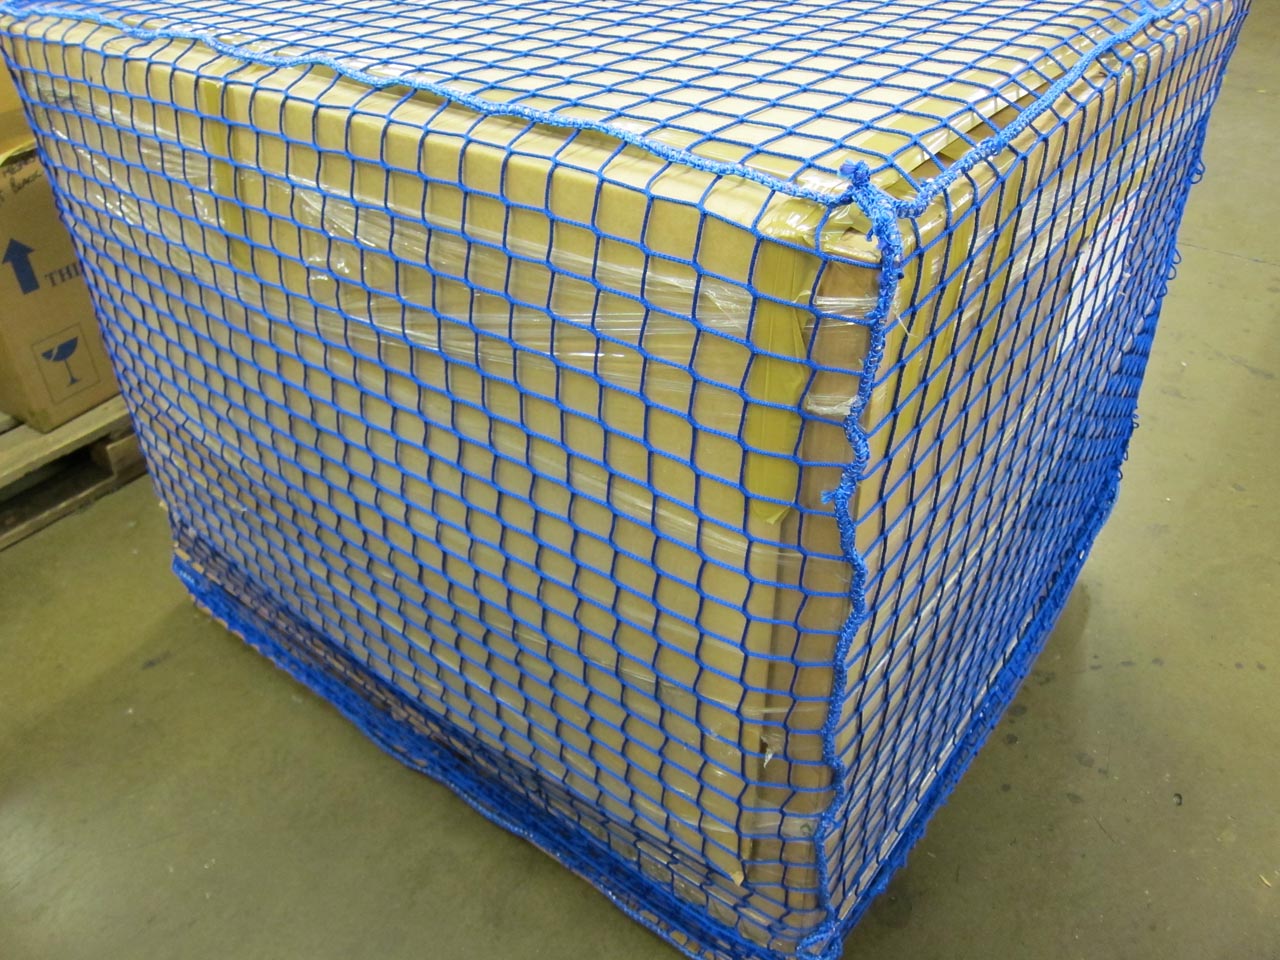 Close-up of a blue pallet cover net.